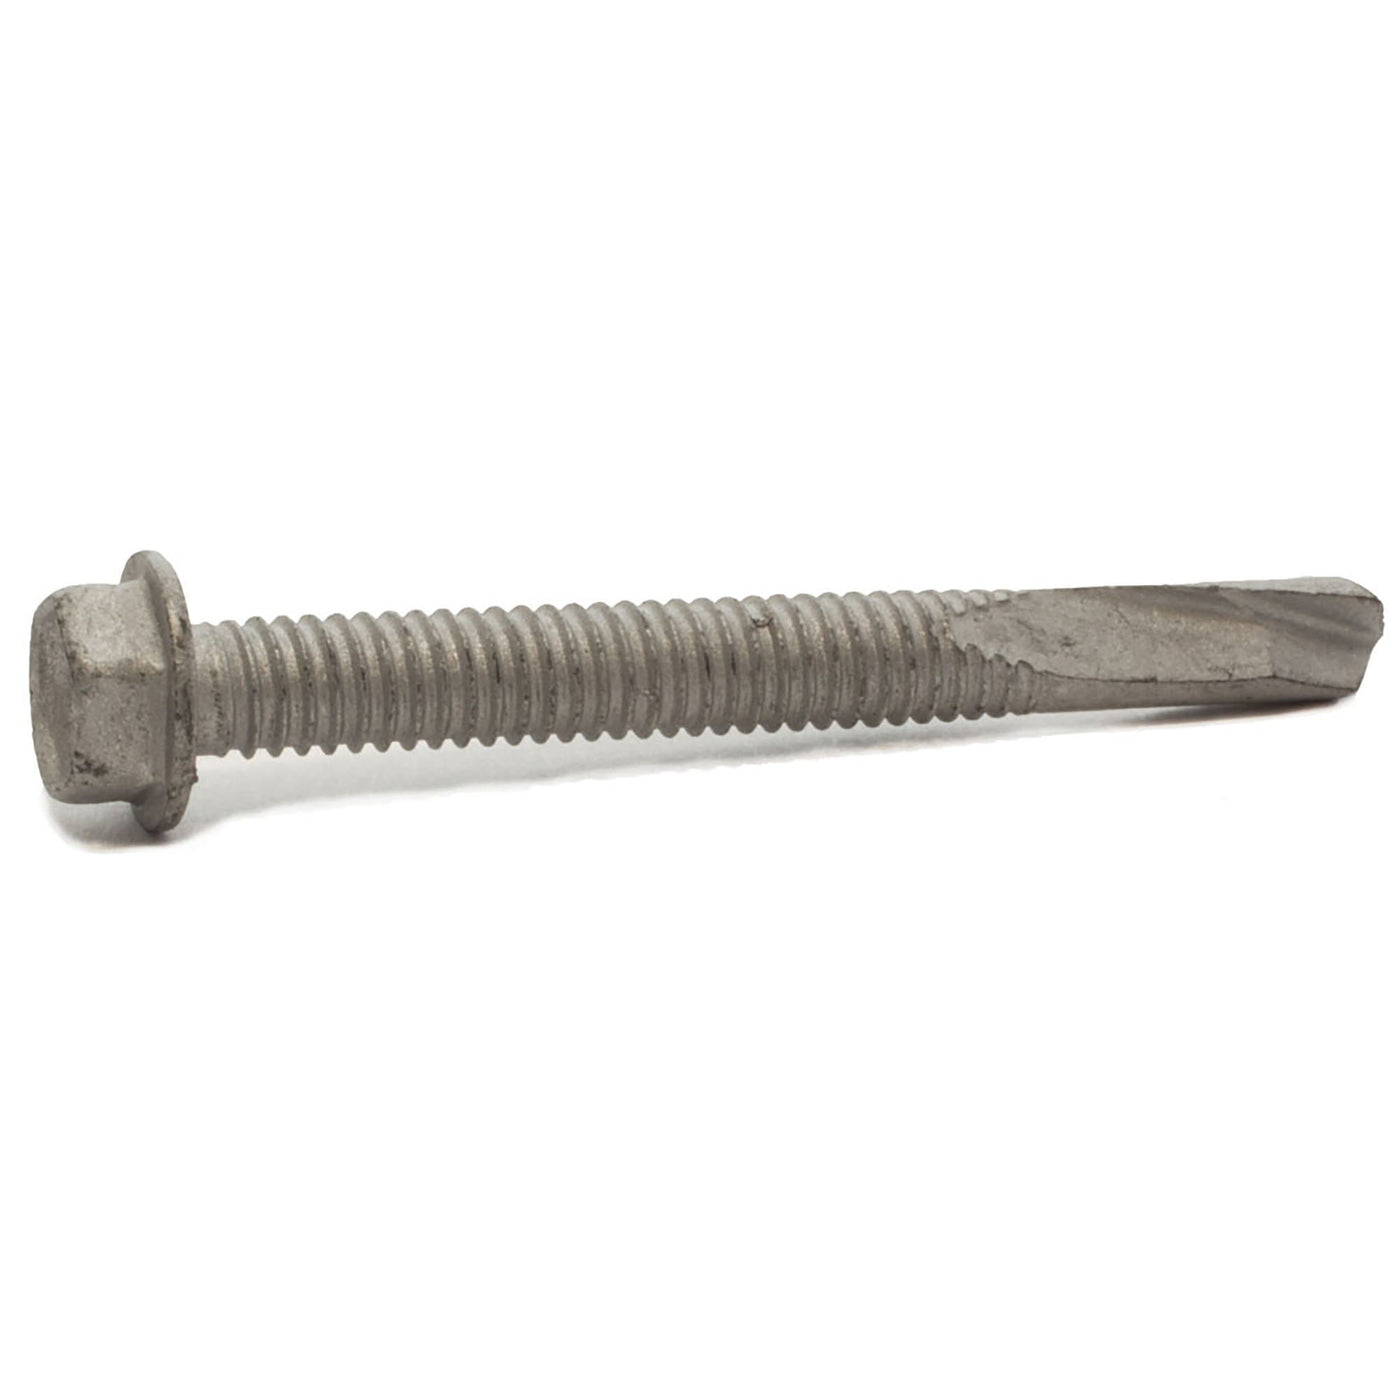 12-24 x 7/8 Hex Washer Head TEKS® Self Drilling Screw (T4) Climaseal® (5000)